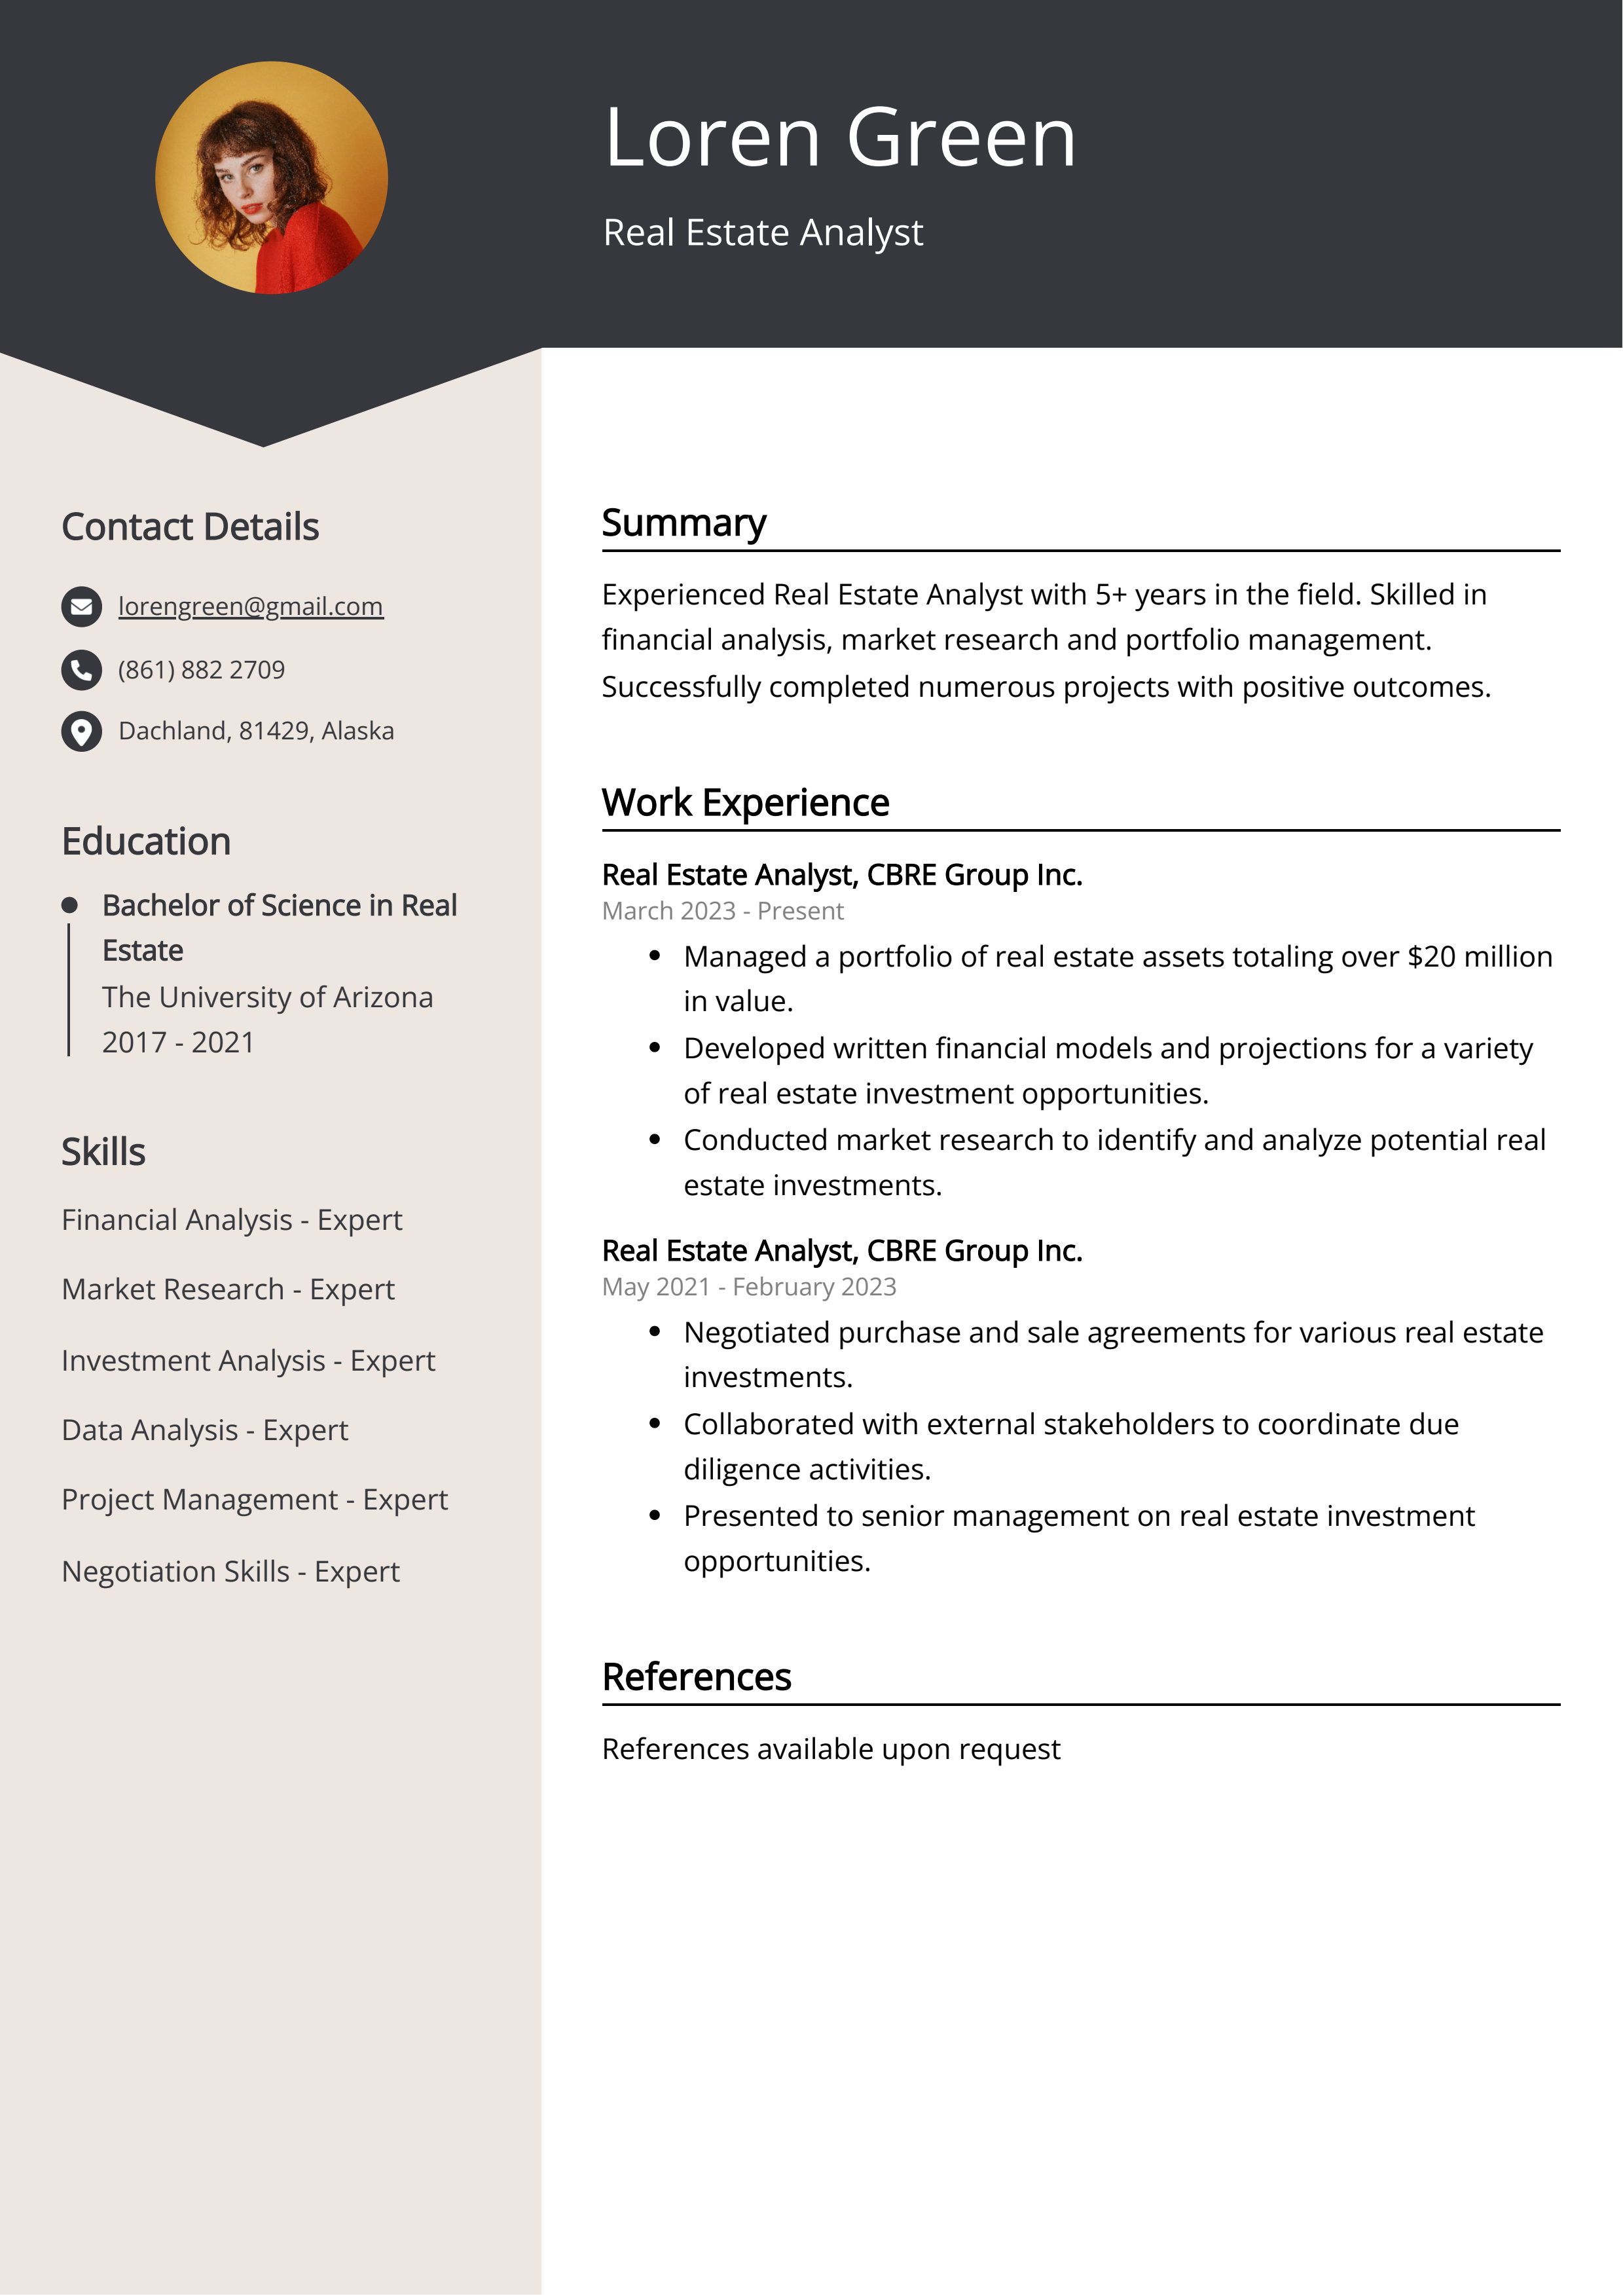 Real Estate Analyst CV Example